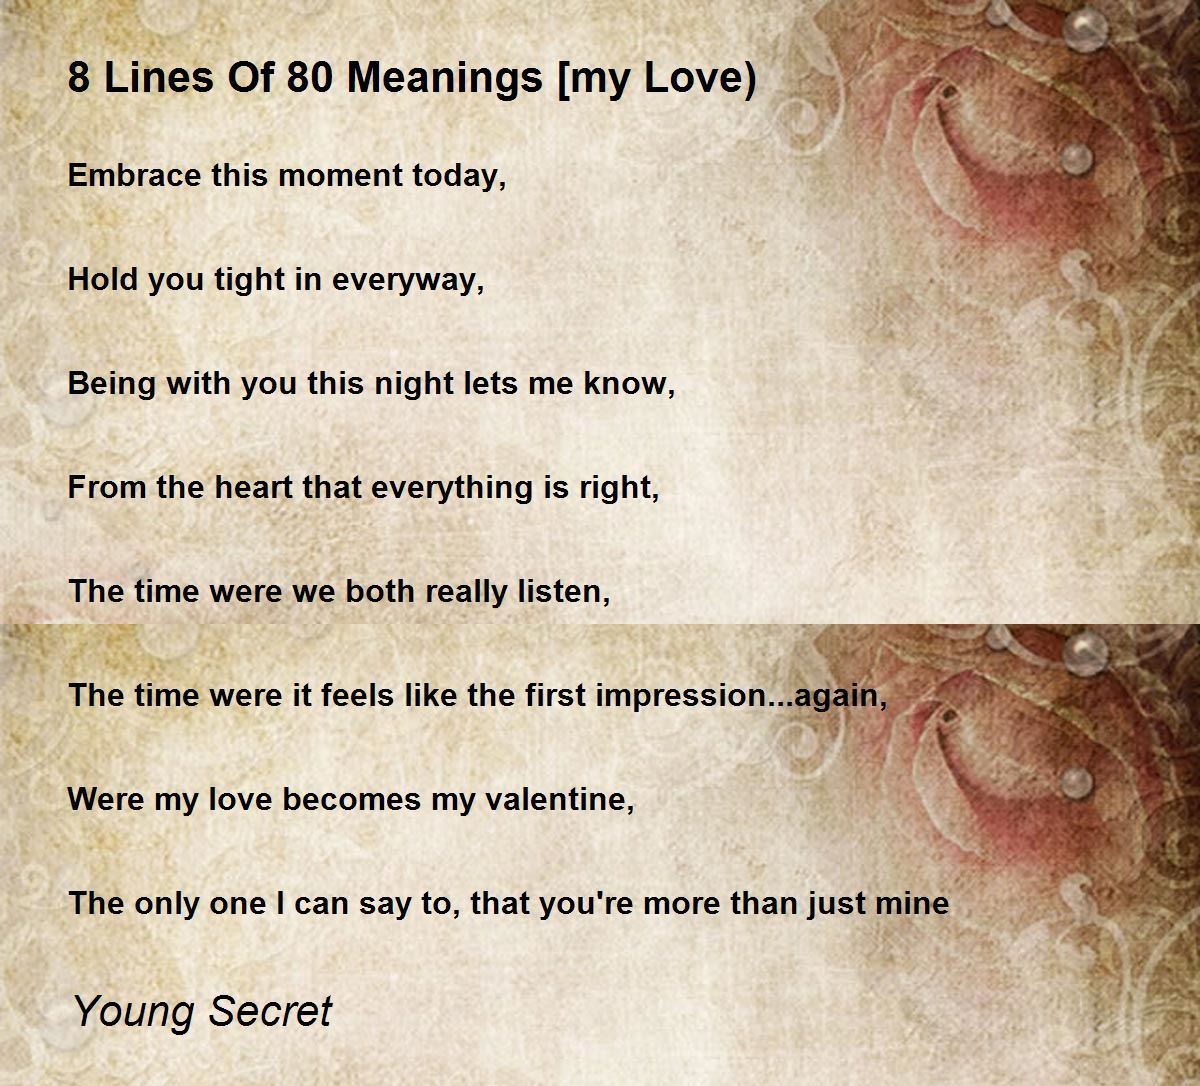 8 Lines Of 80 Meanings My Love 8 Lines Of 80 Meanings My Love Poem By Young Secret